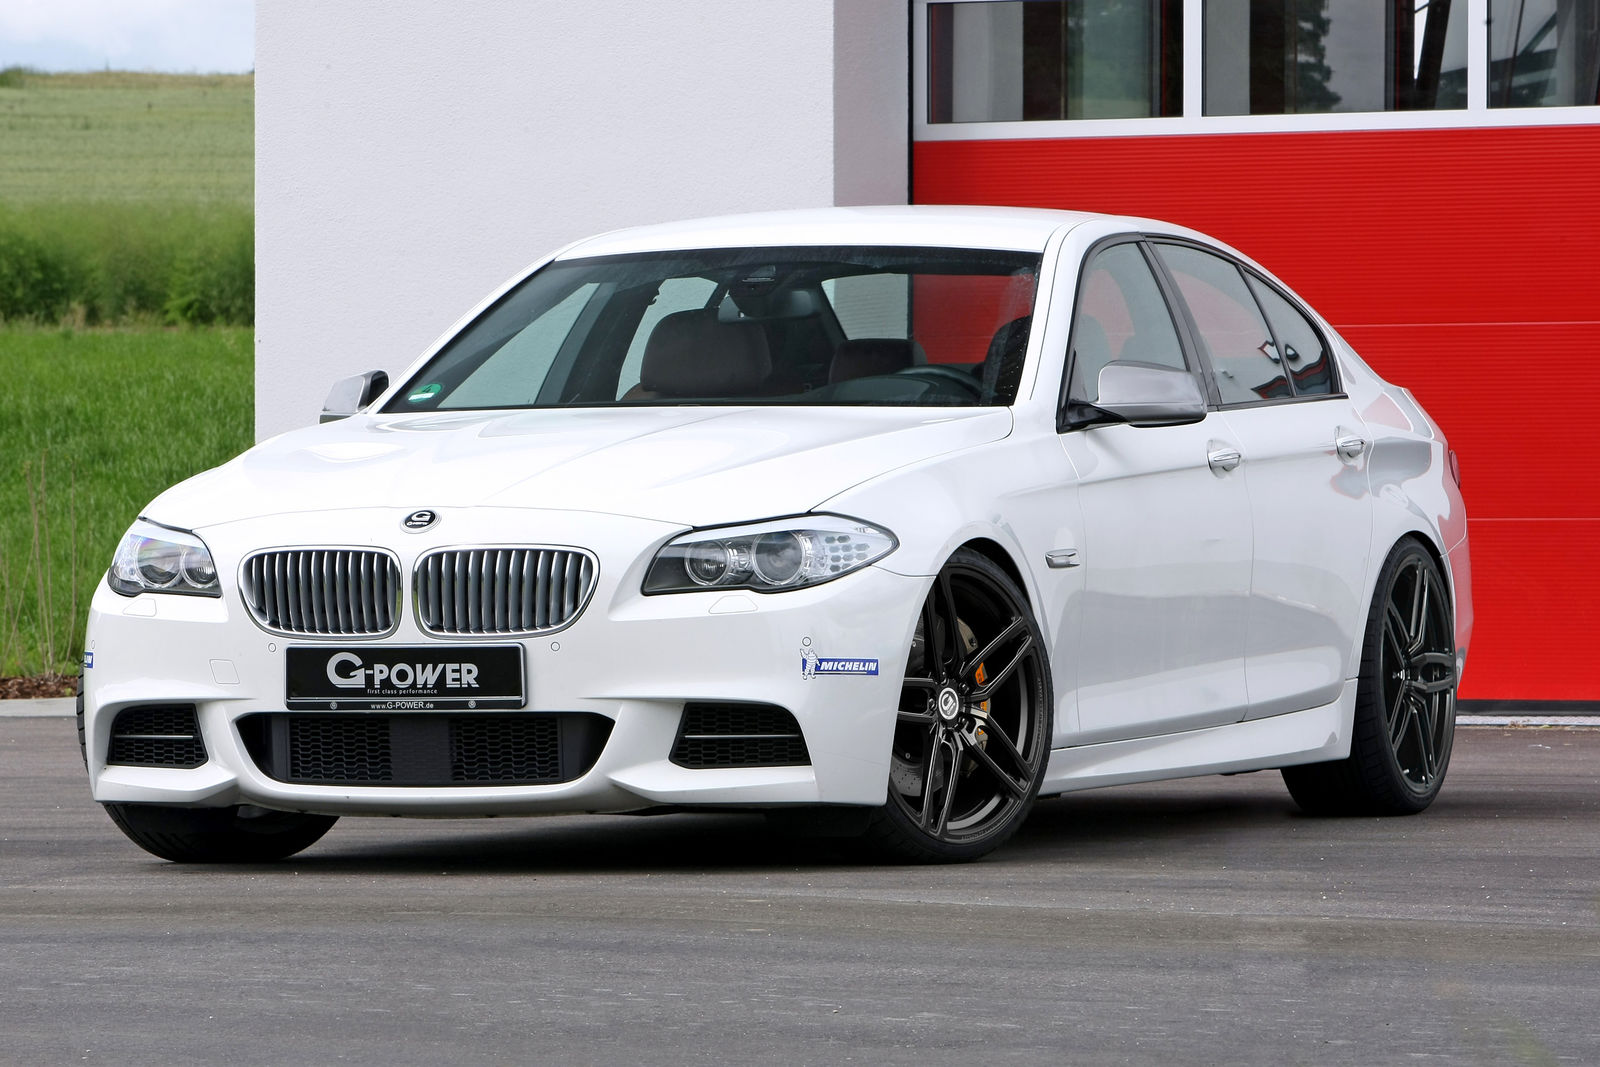 GPower BMW M550d xDrive Has 435 HP and 850 Nm of Torque